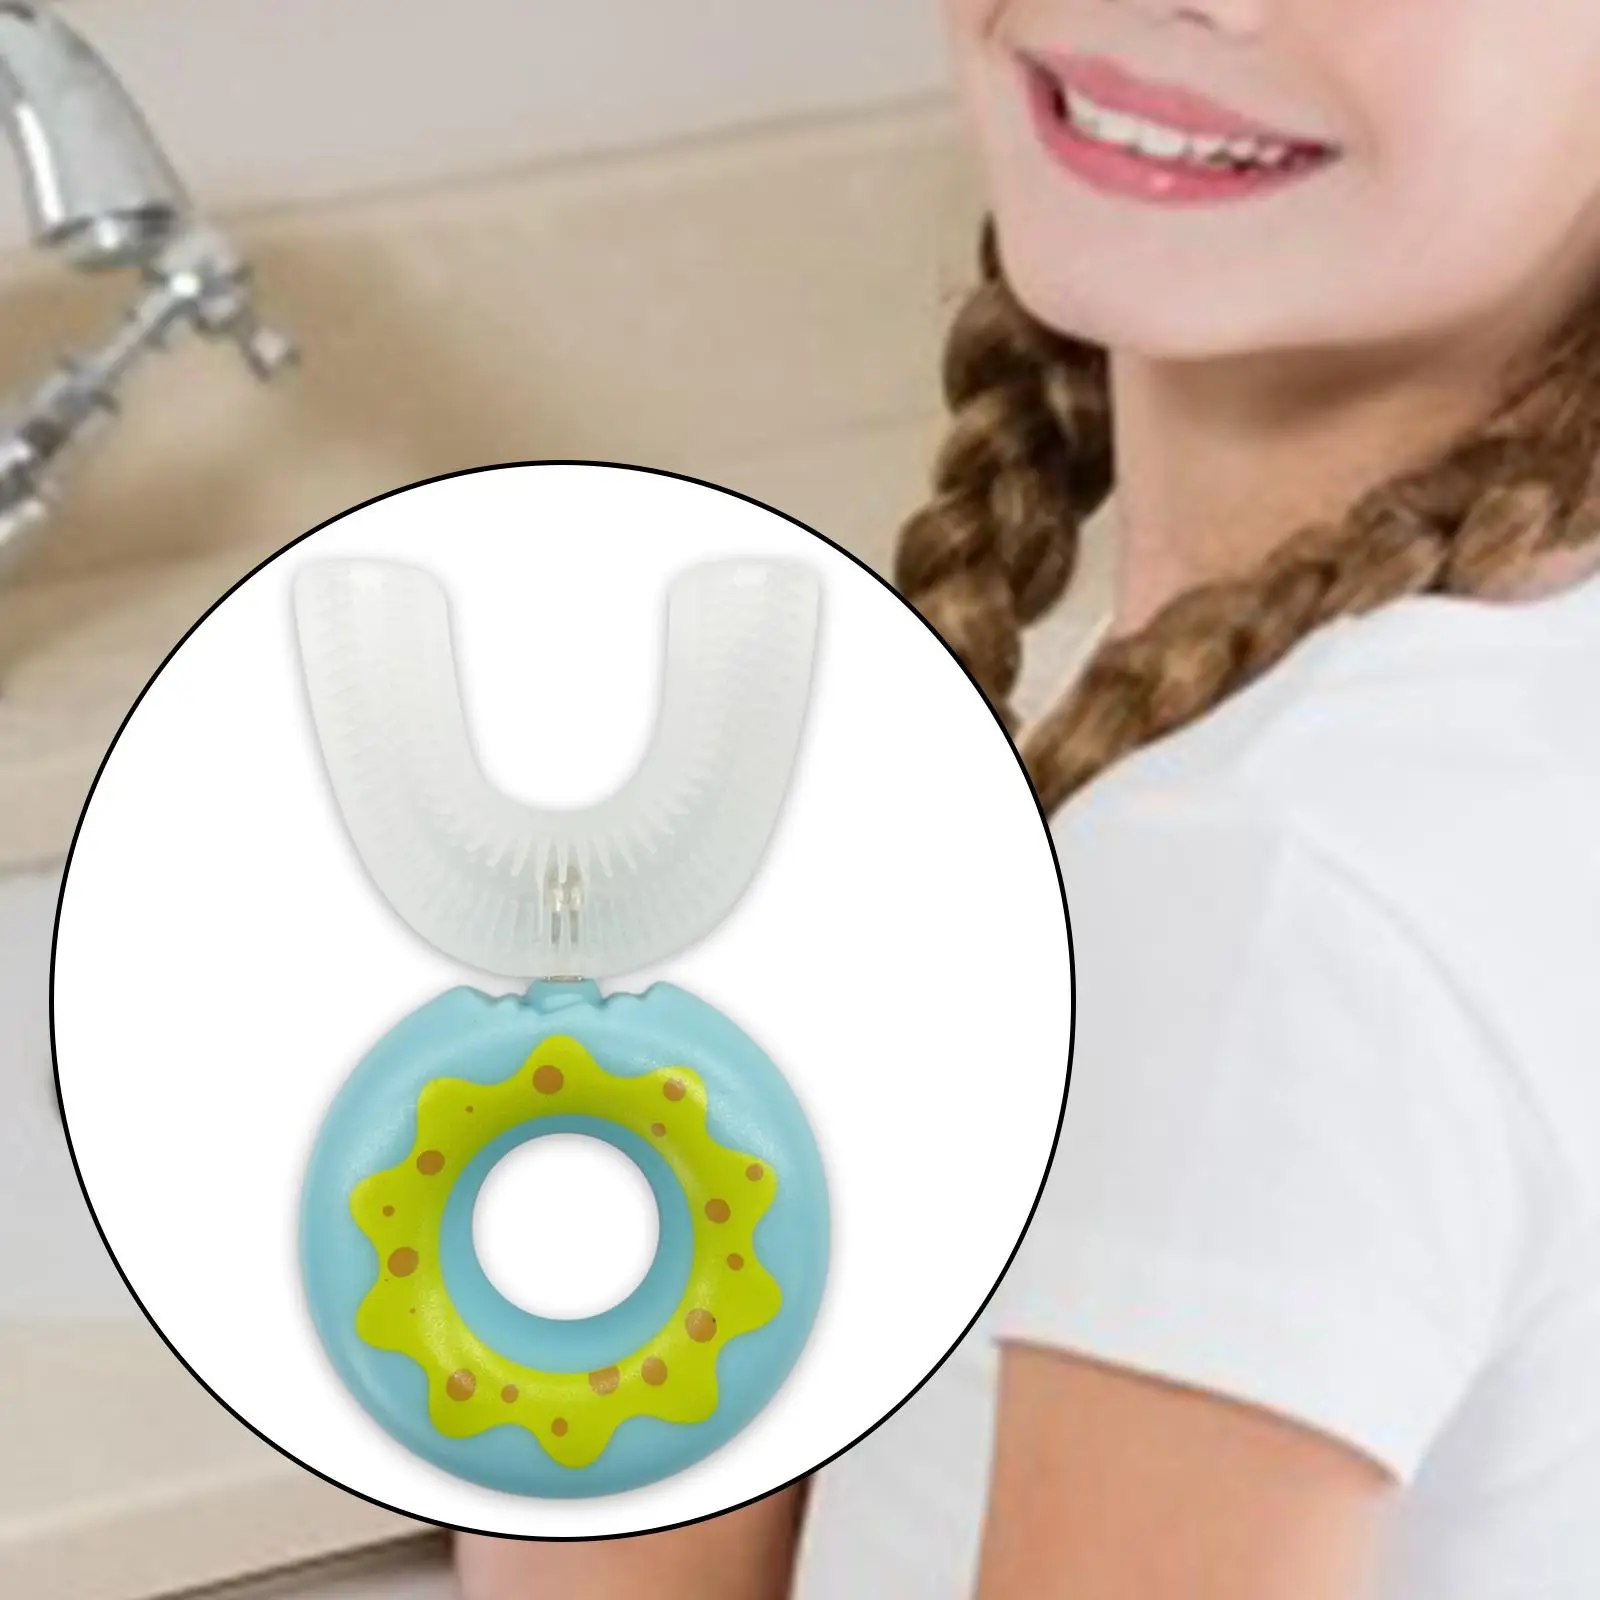 Donut Kids  Toothbrush  Silicone Oral  Cleaning Round Smooth Handle Manual Toothbrush for 